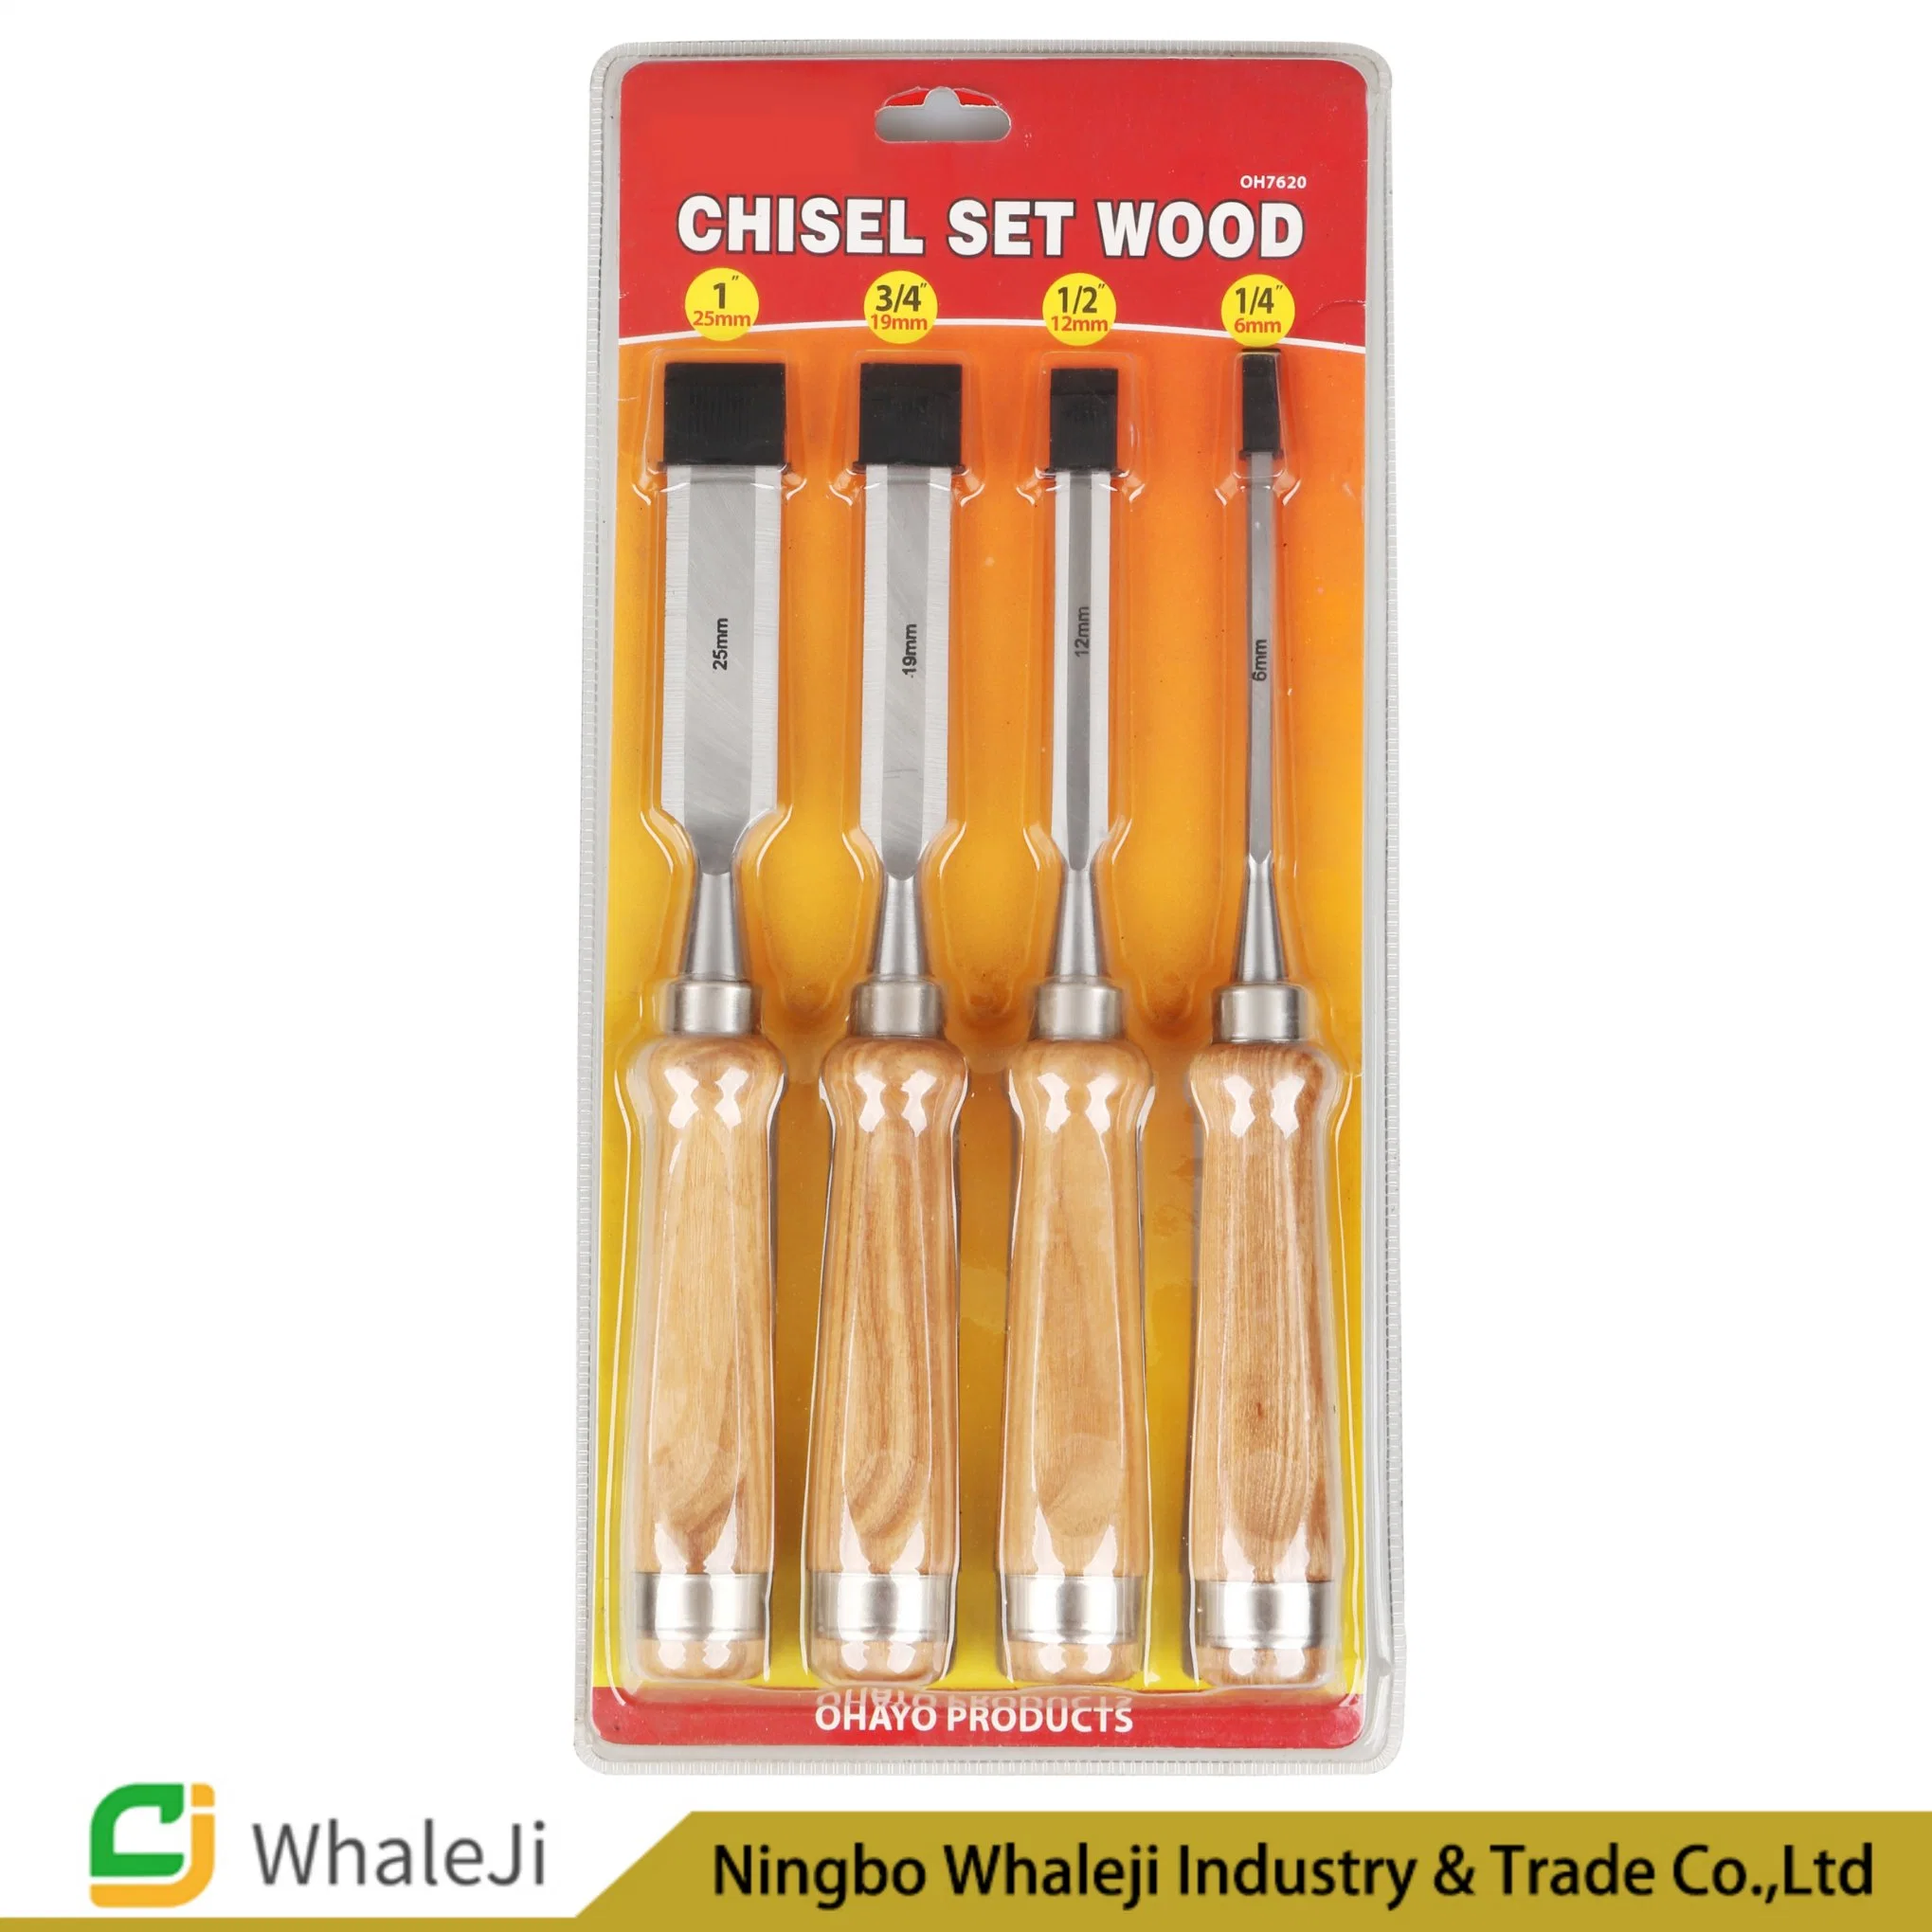 High-Quality Woodworking Chisel Tool Set with 4 Pieces and Wooden Handles